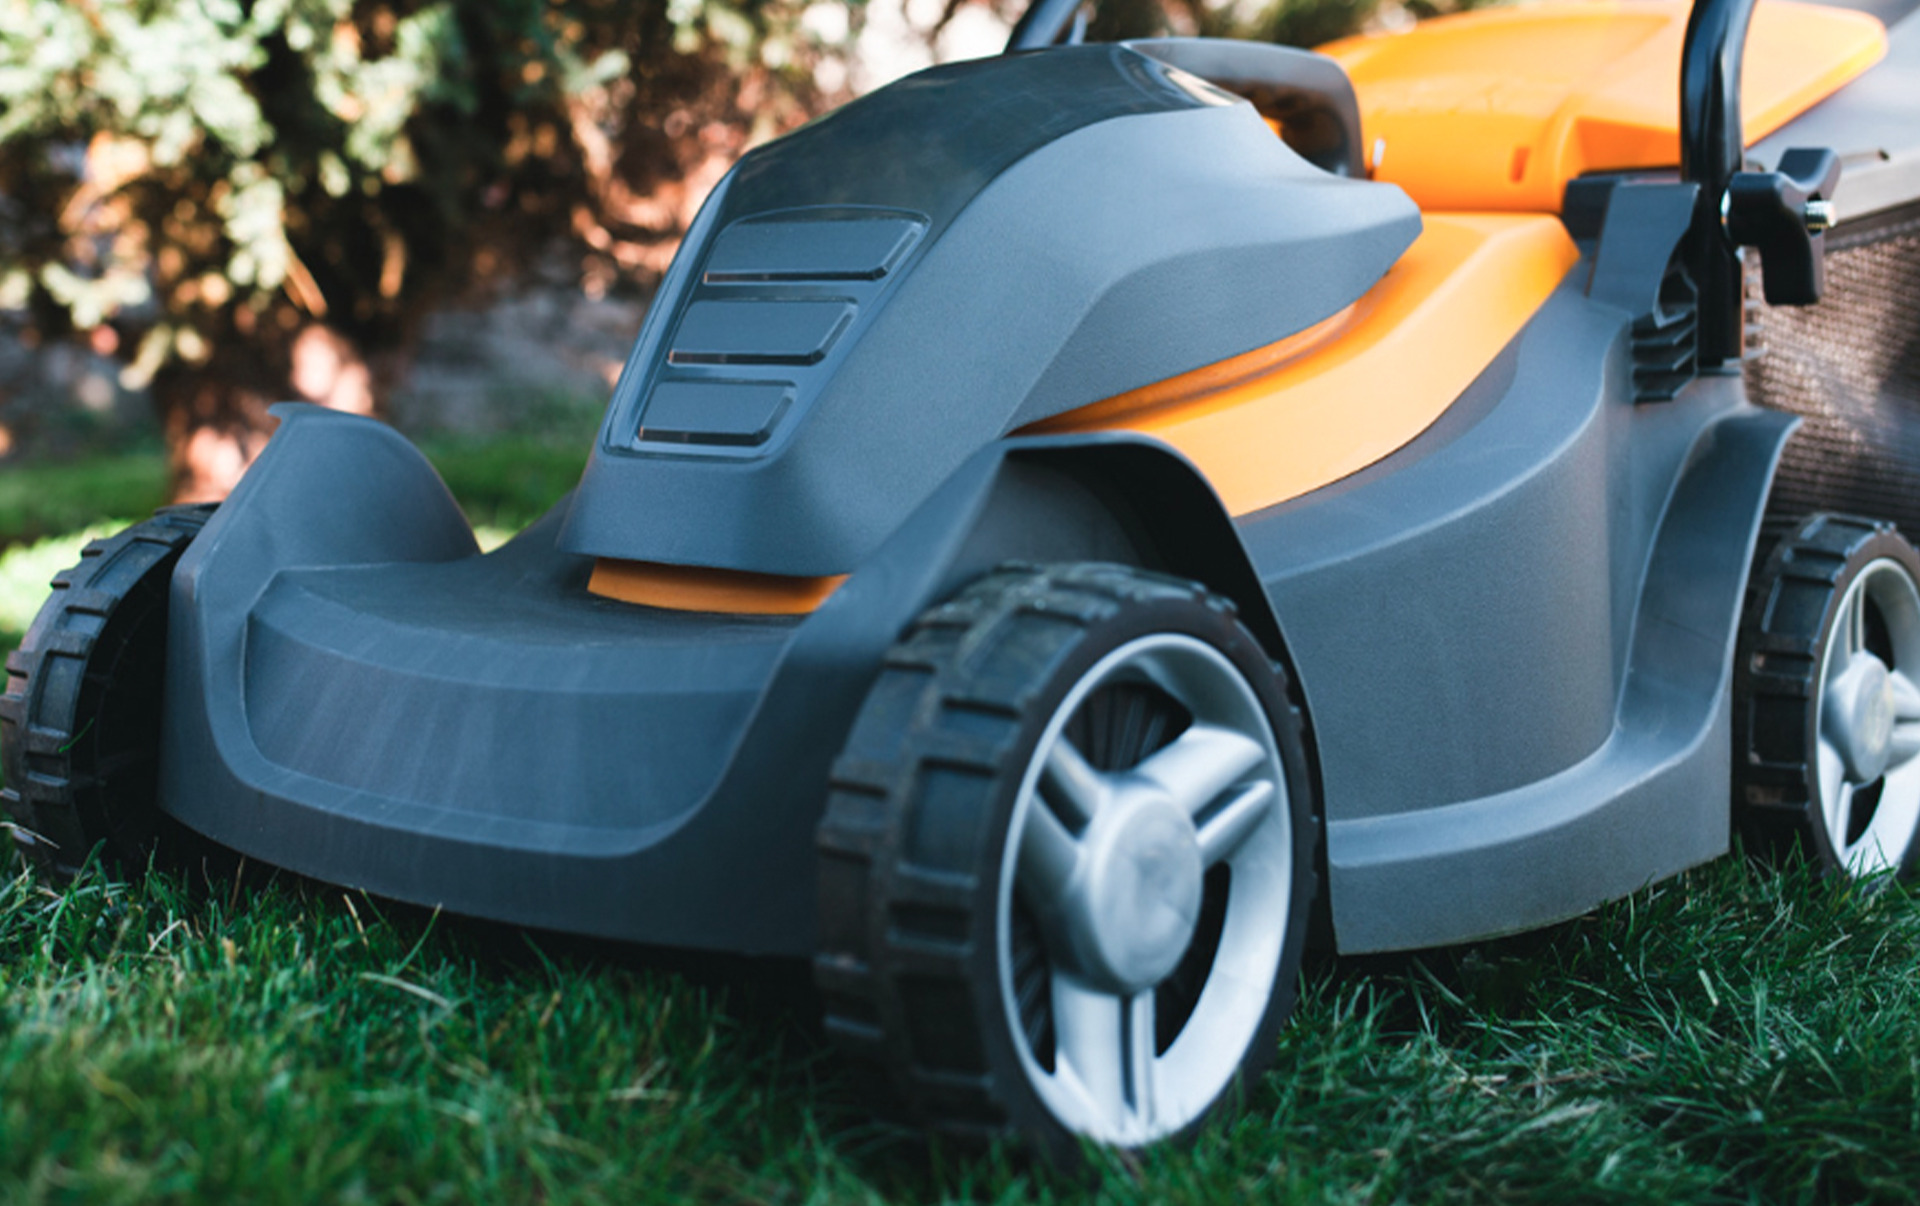 Whether it’s silent lawnmowers, smart pool cleaners, or autonomous food service robots, Beam has a battery solution for you.